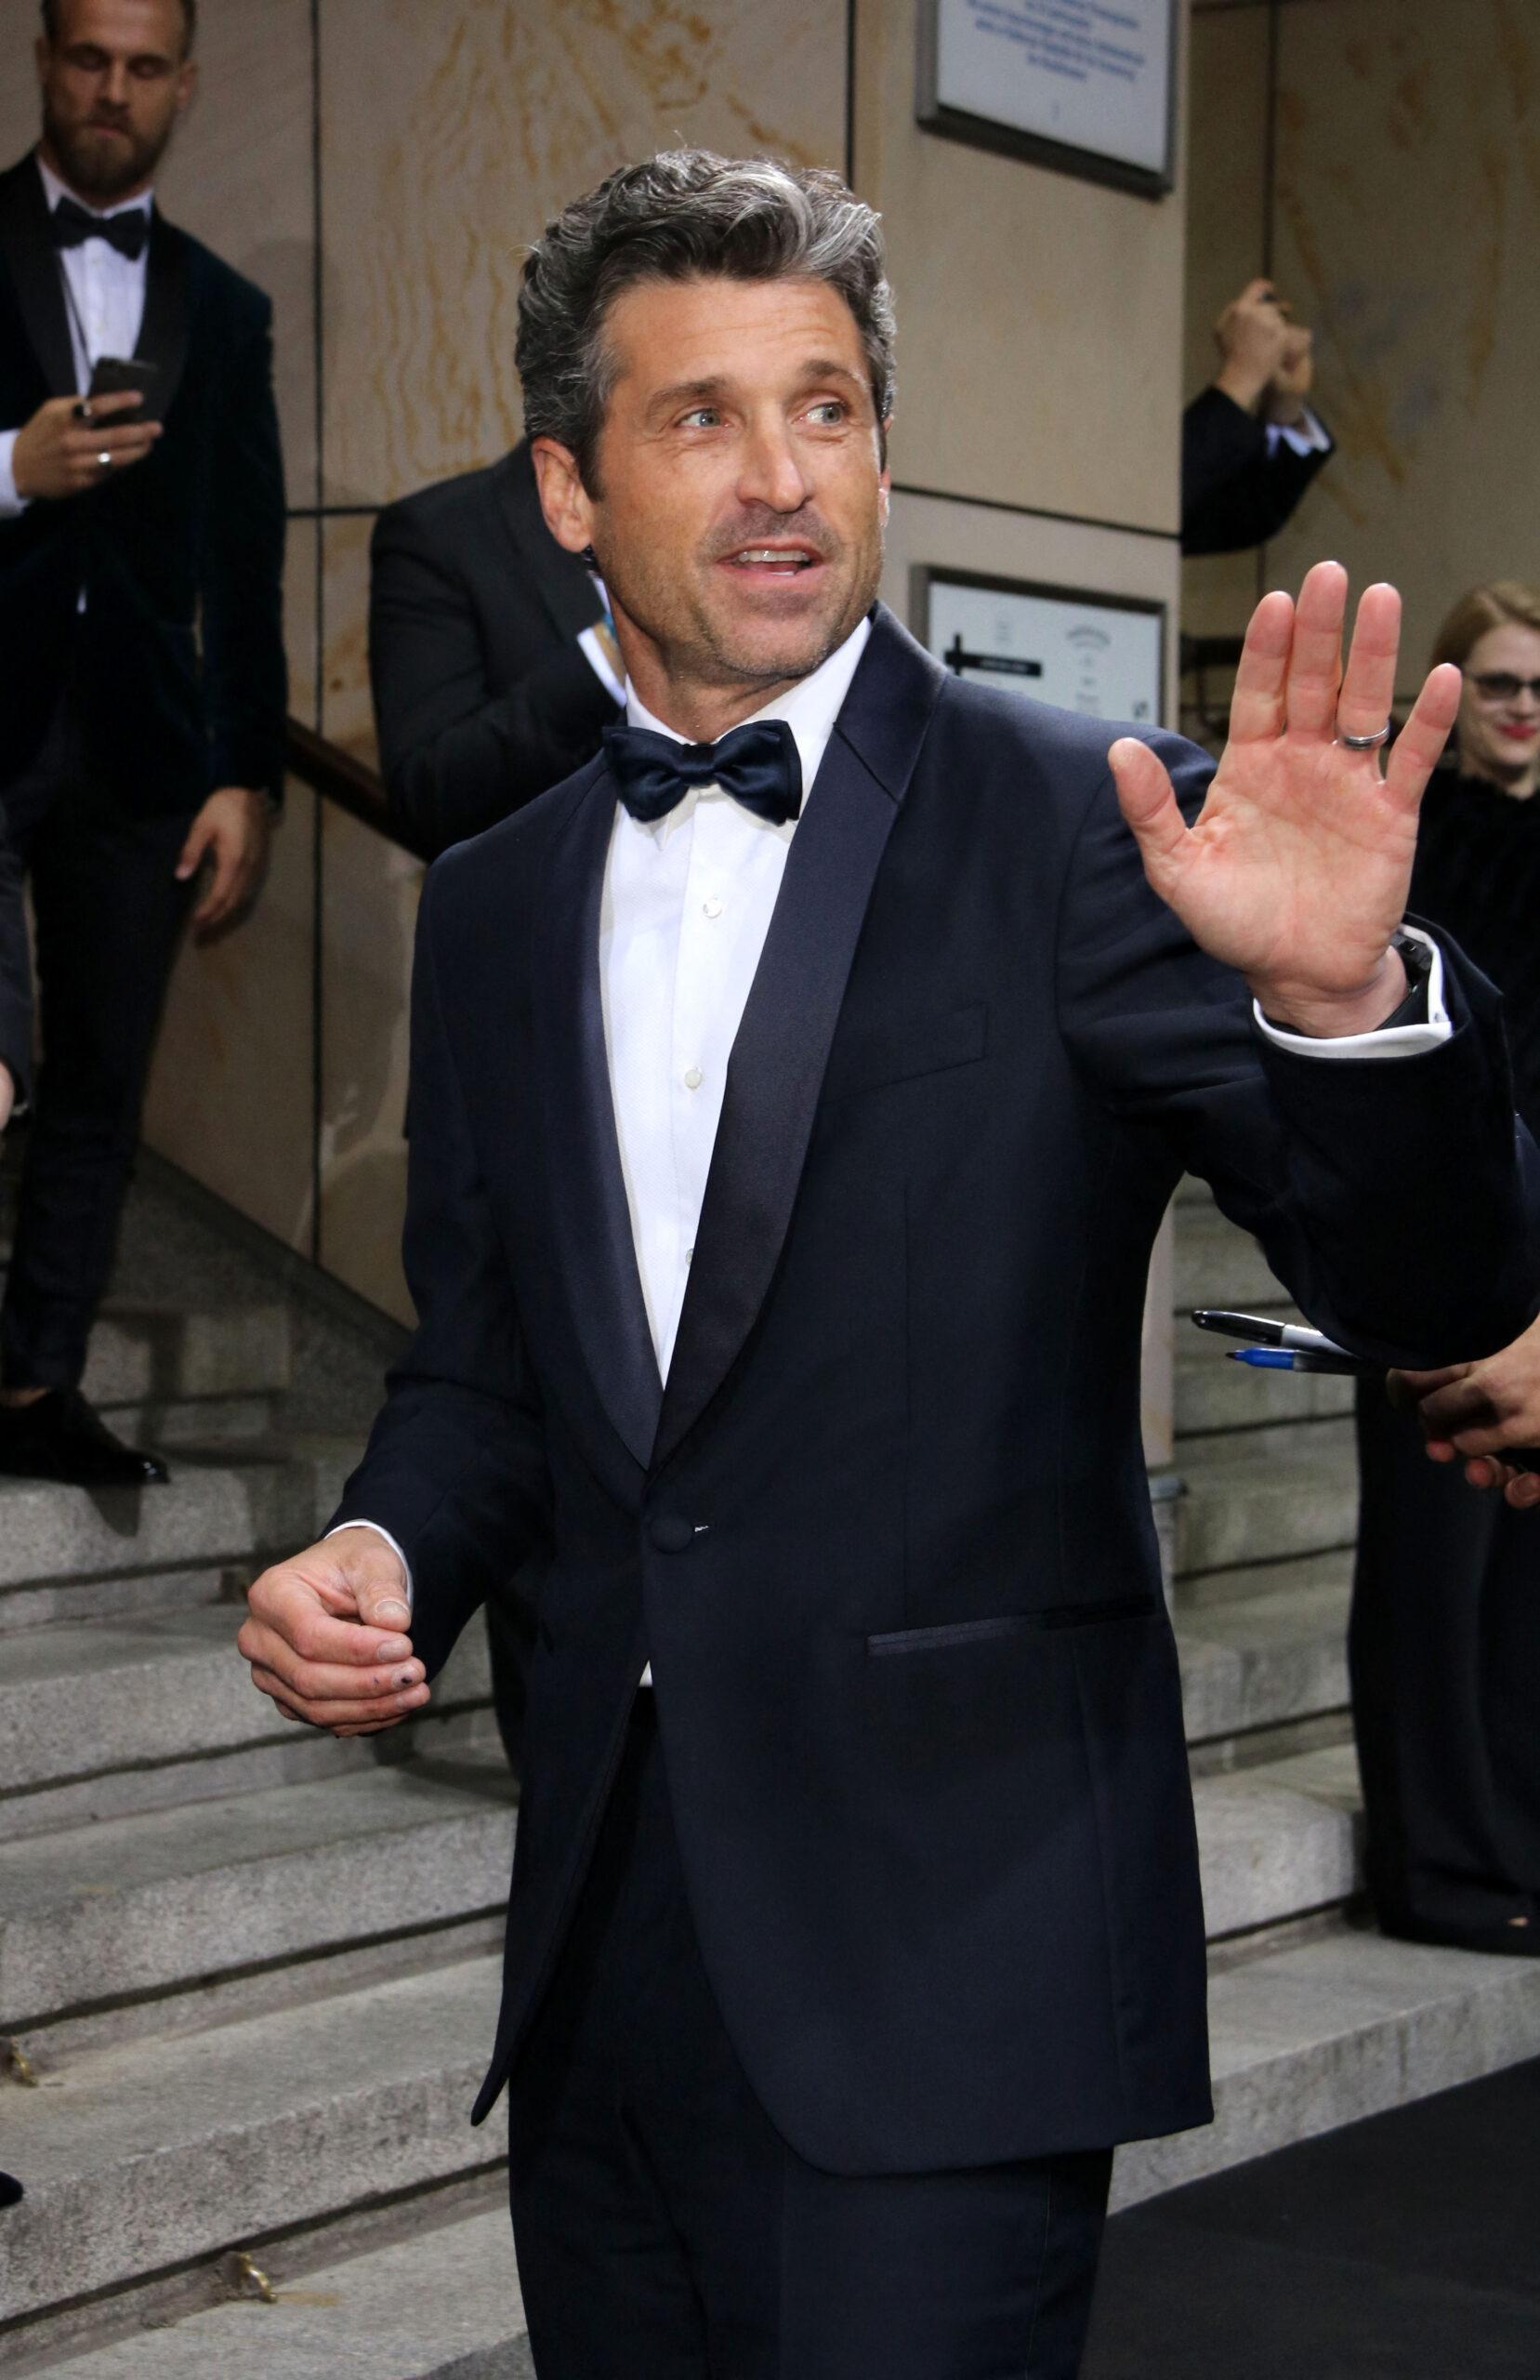 Patrick Dempsey attends the 20th GQ Men of the Year Award in Berlin, Germany.